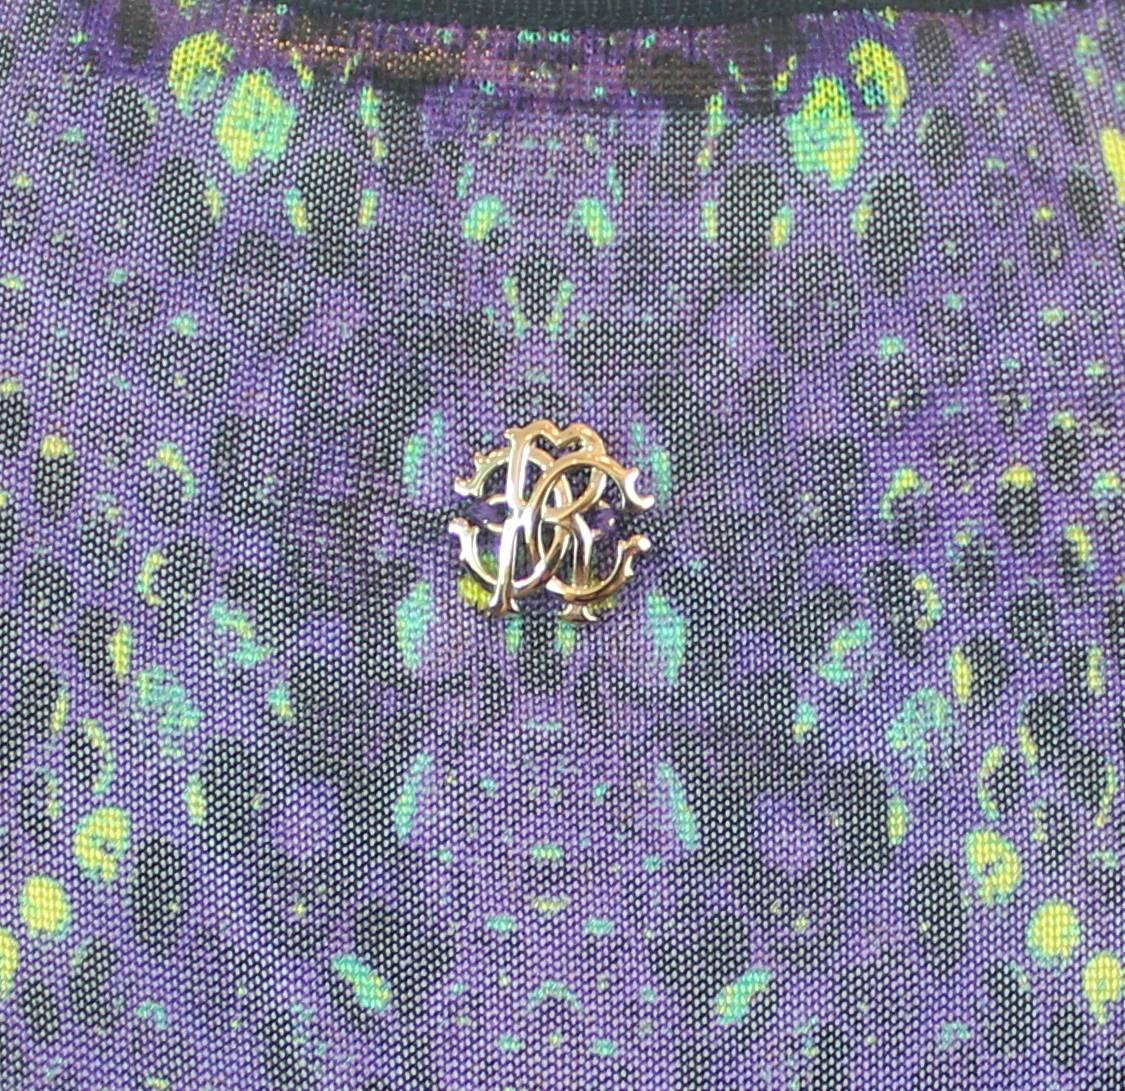 Women's Roberto Cavalli Purple and Lime Snake Printed Knit Oversize Tunic Top - M